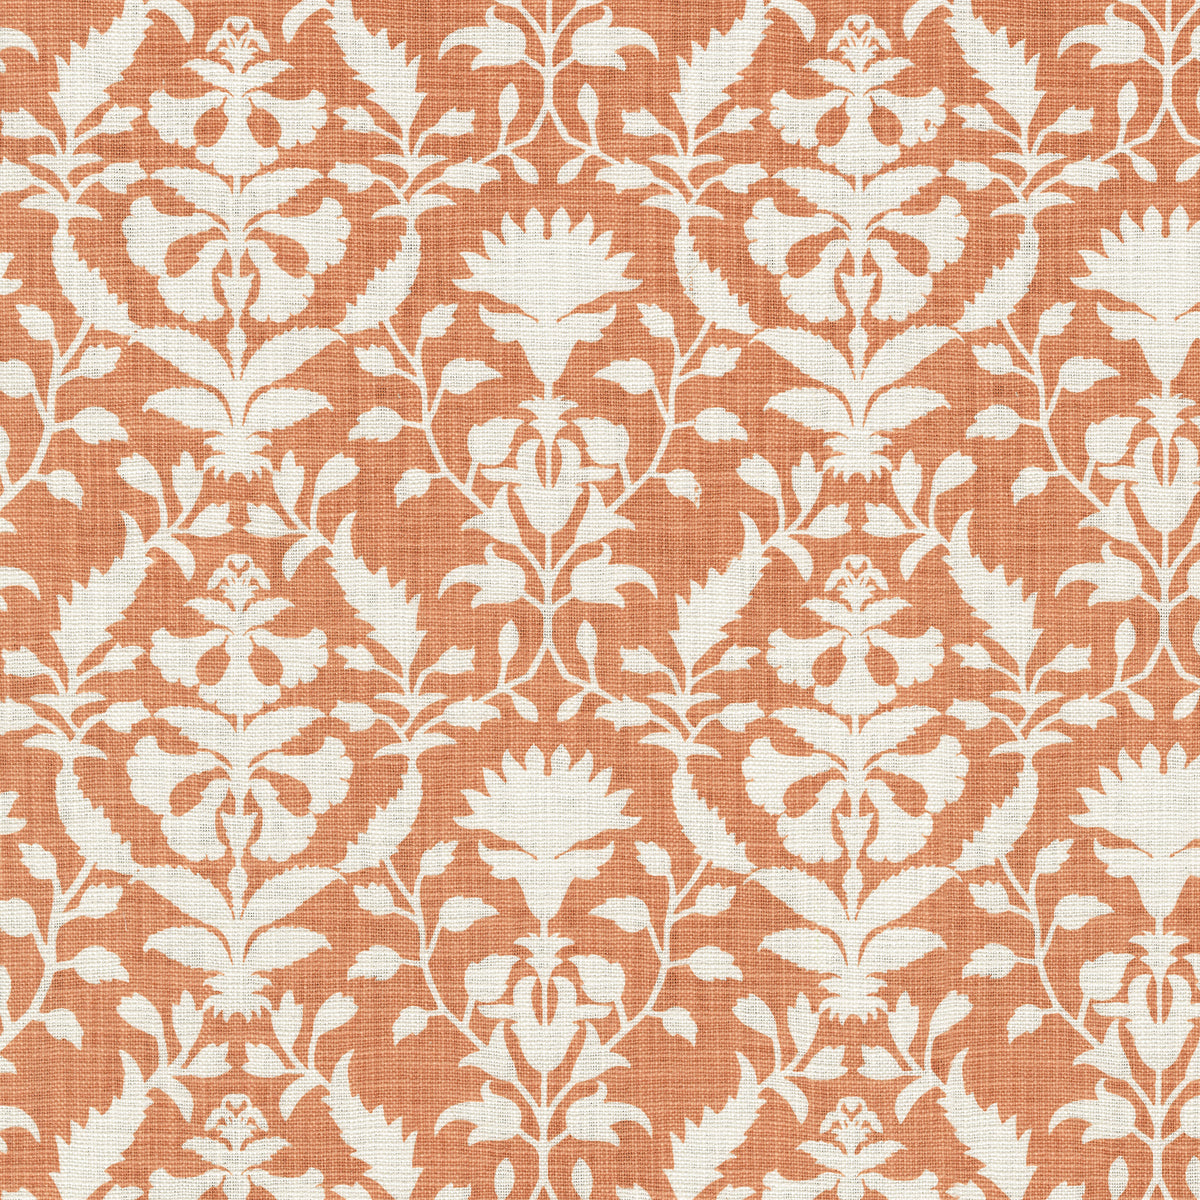 P/K Lifestyles Peacefulness - Coral 411743 Upholstery Fabric